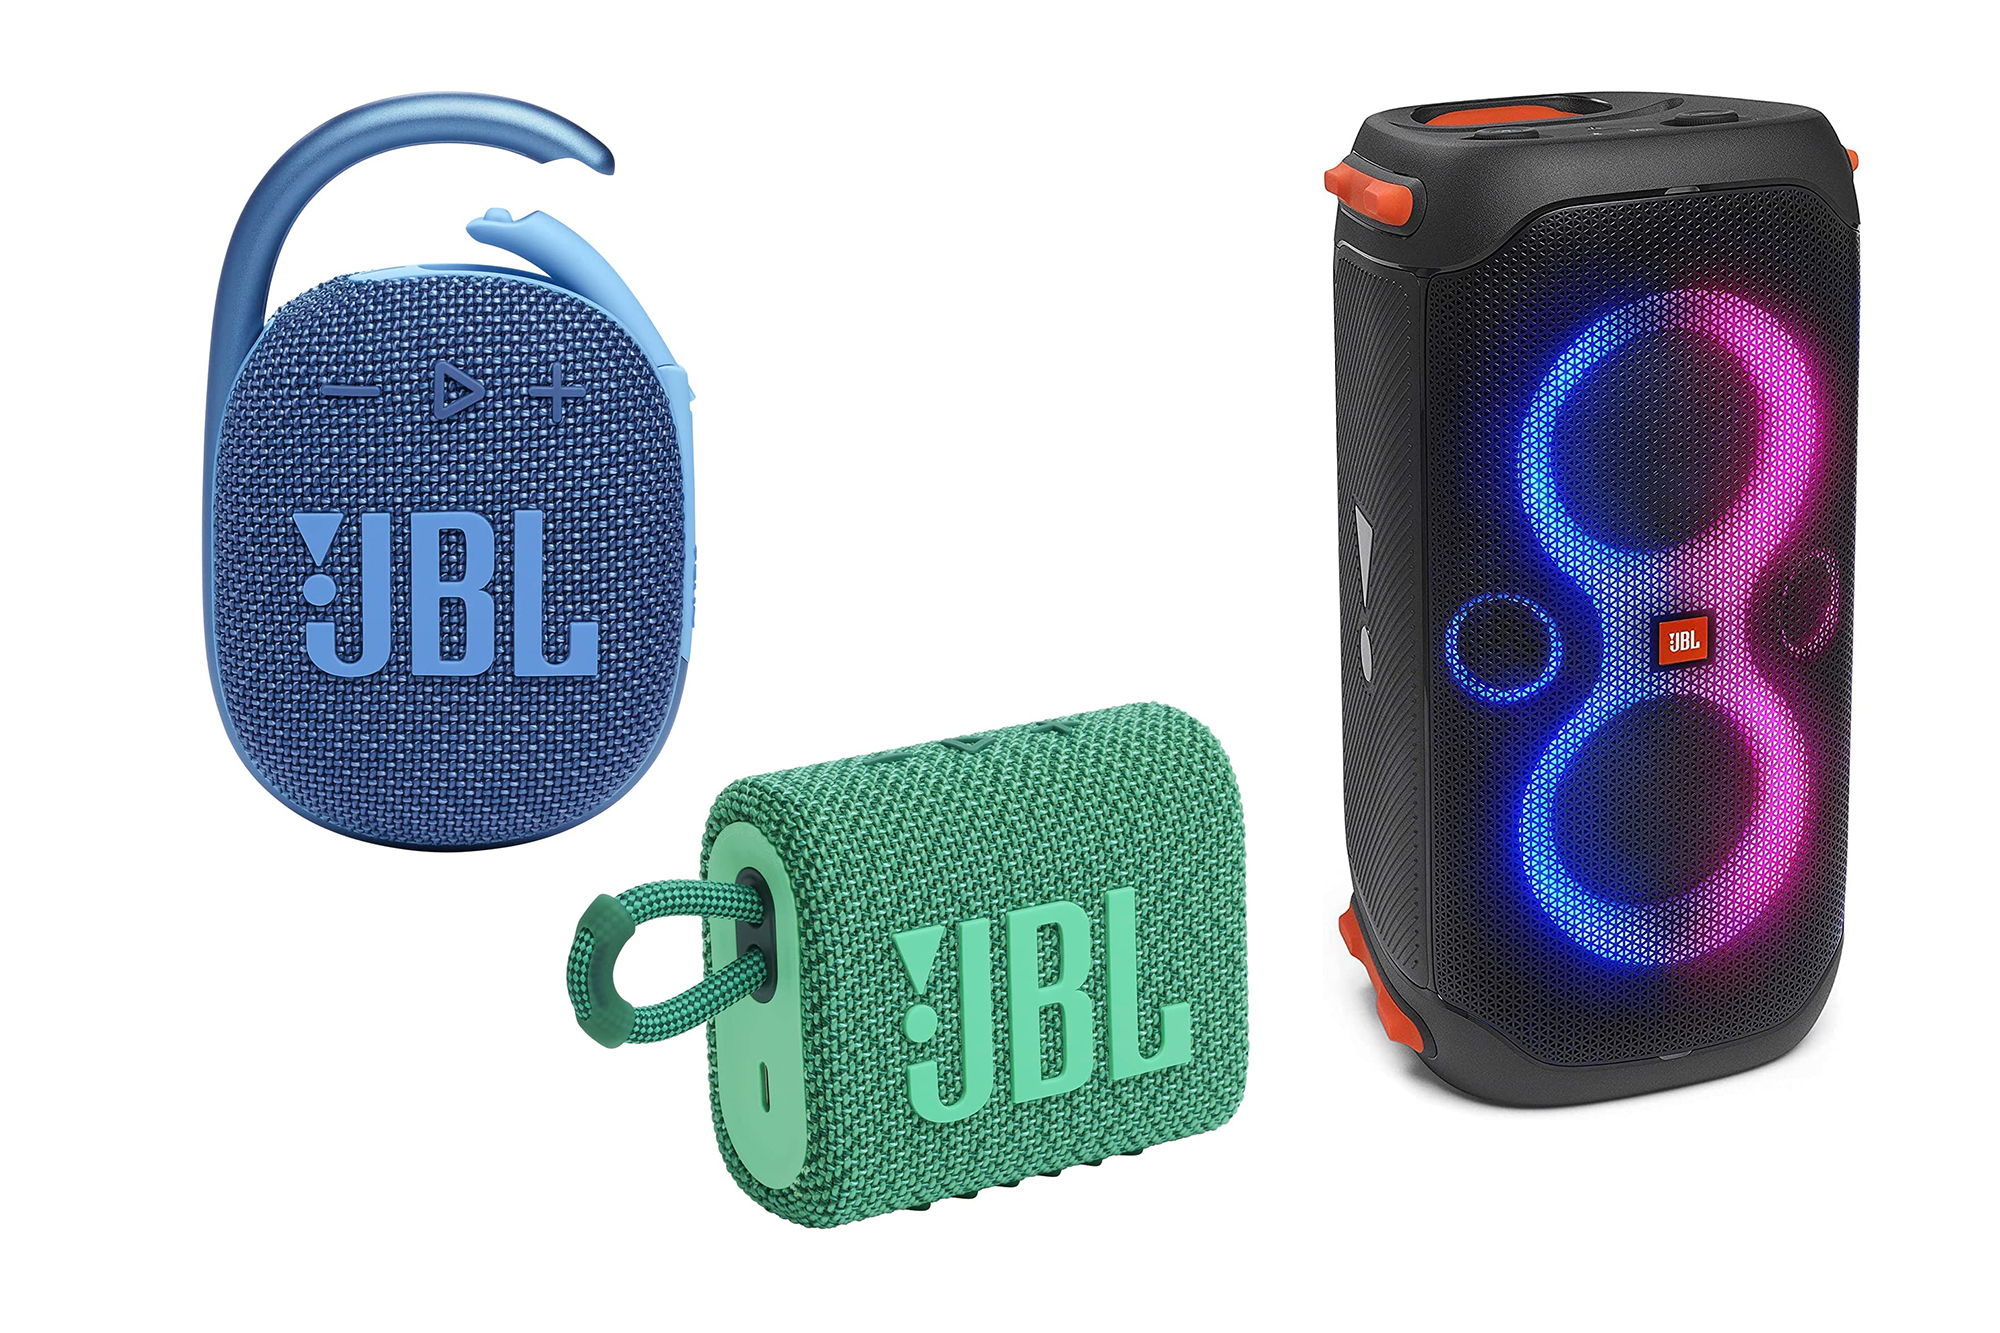 Bring all Science outdoor speaker yard the to Popular boys with | Amazon on bops and deals the